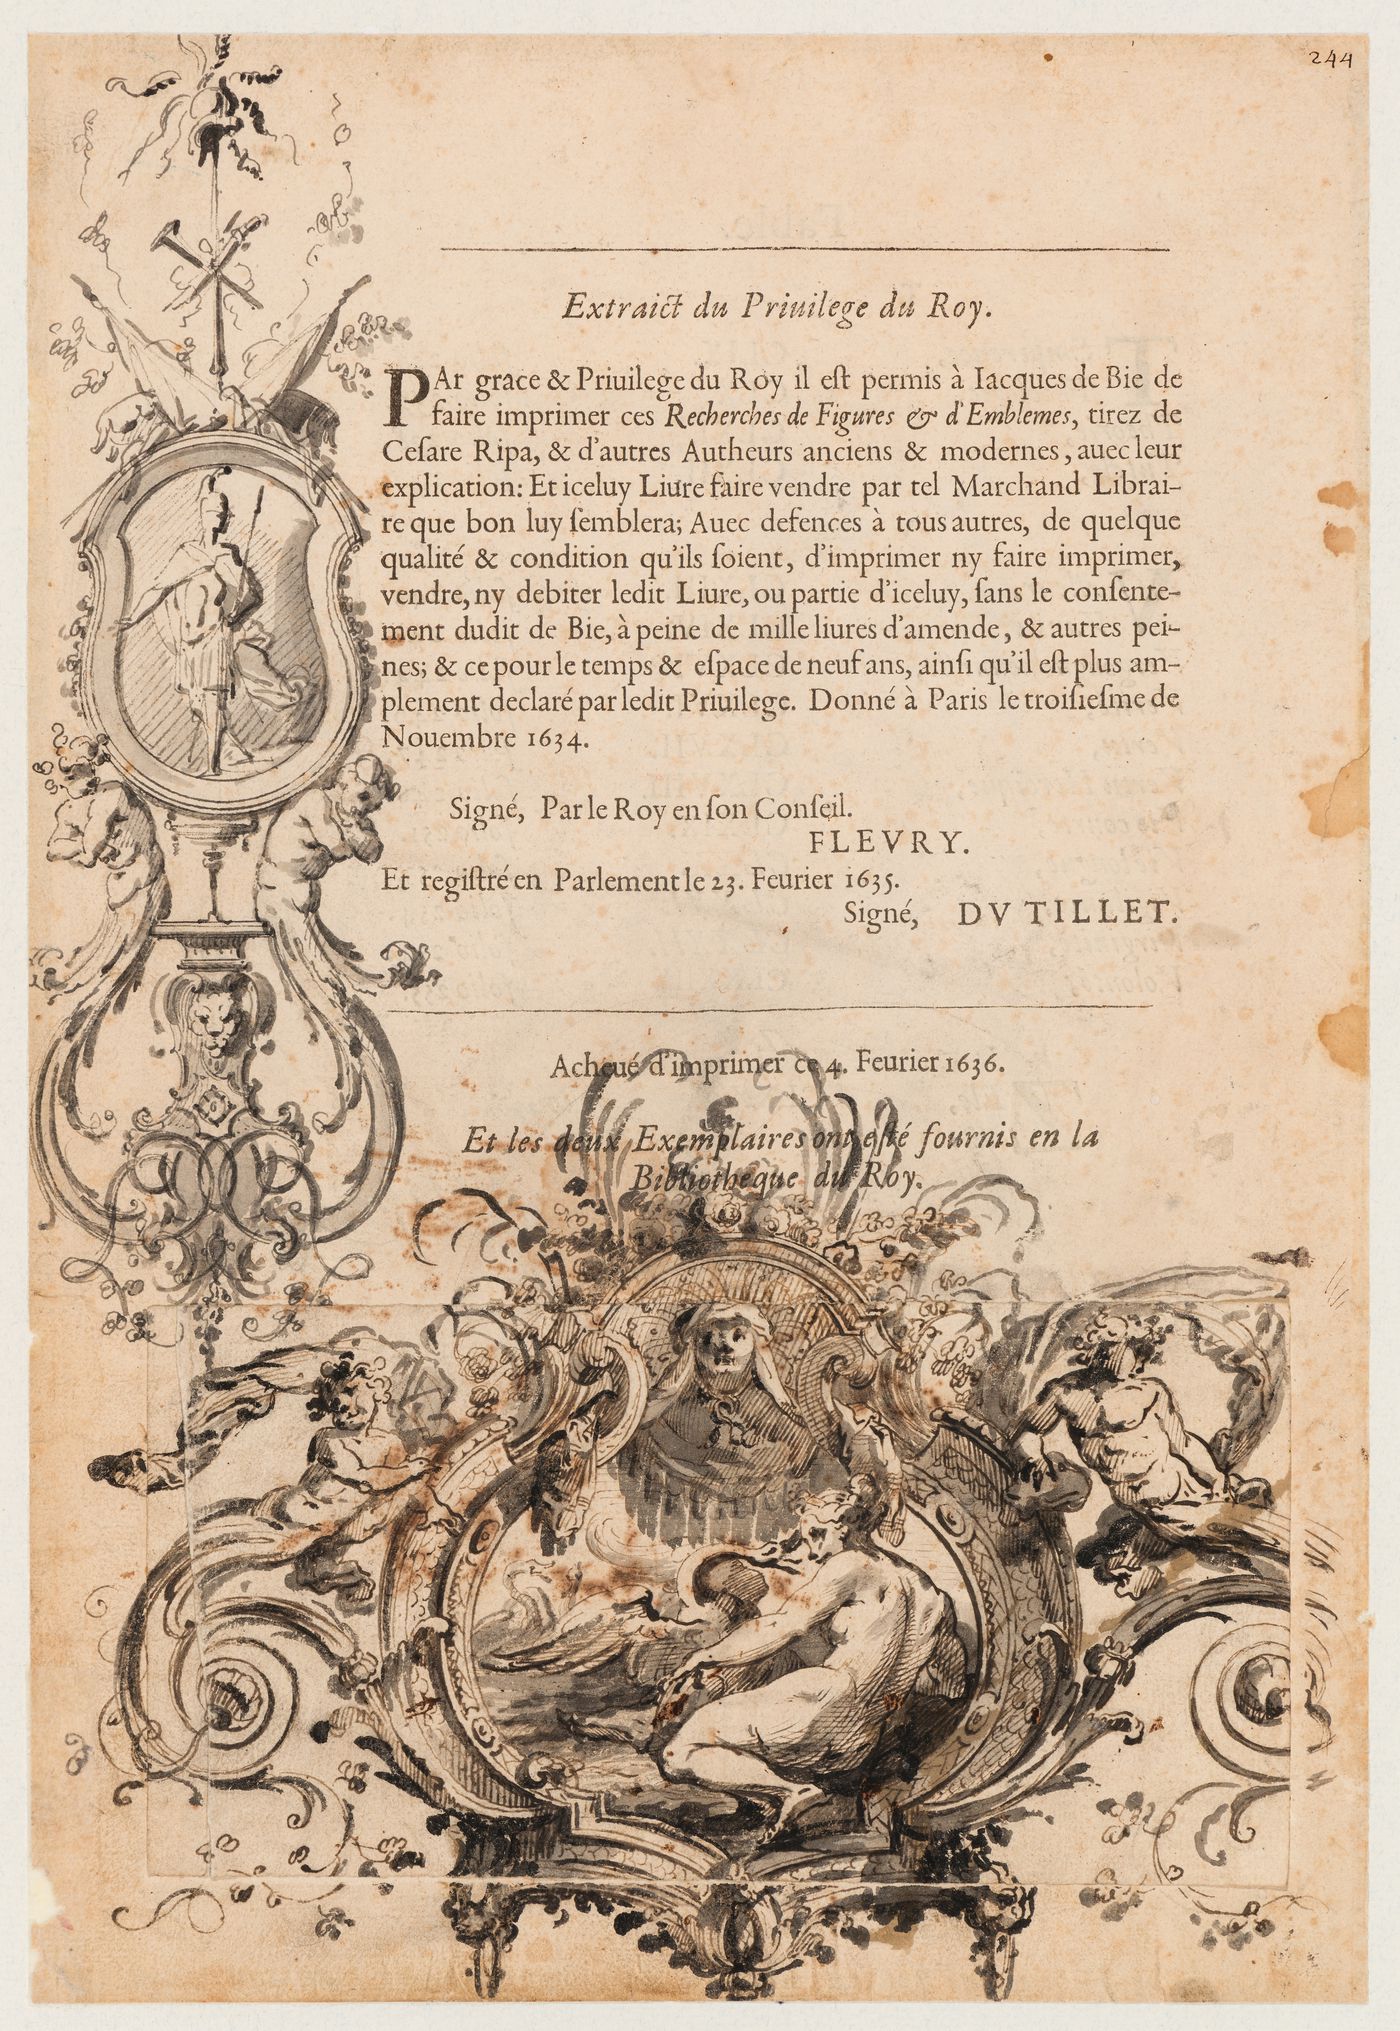 Ornamental drawing on a folio of the 1636 French edition of Cesare Ripa's "Iconologie"